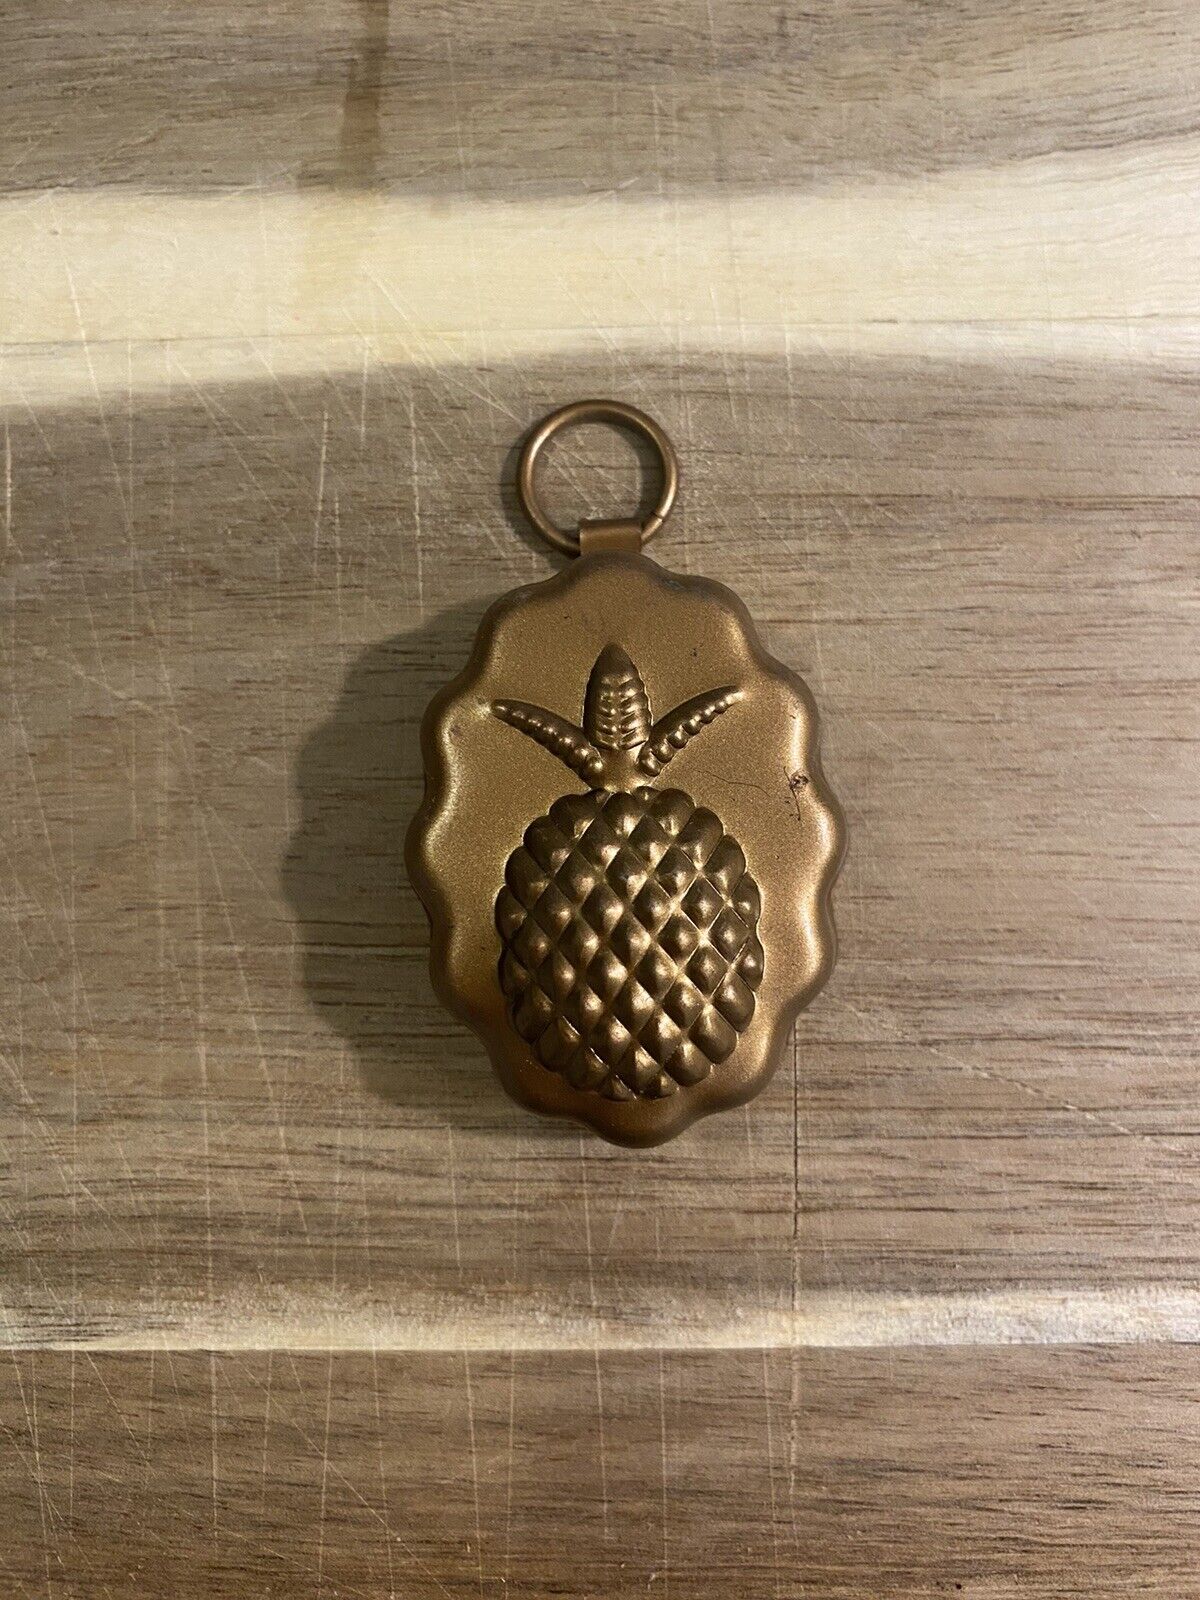 Pineapple Mini Copper Colored Metal Mold w/ Hanger Excellent Condition